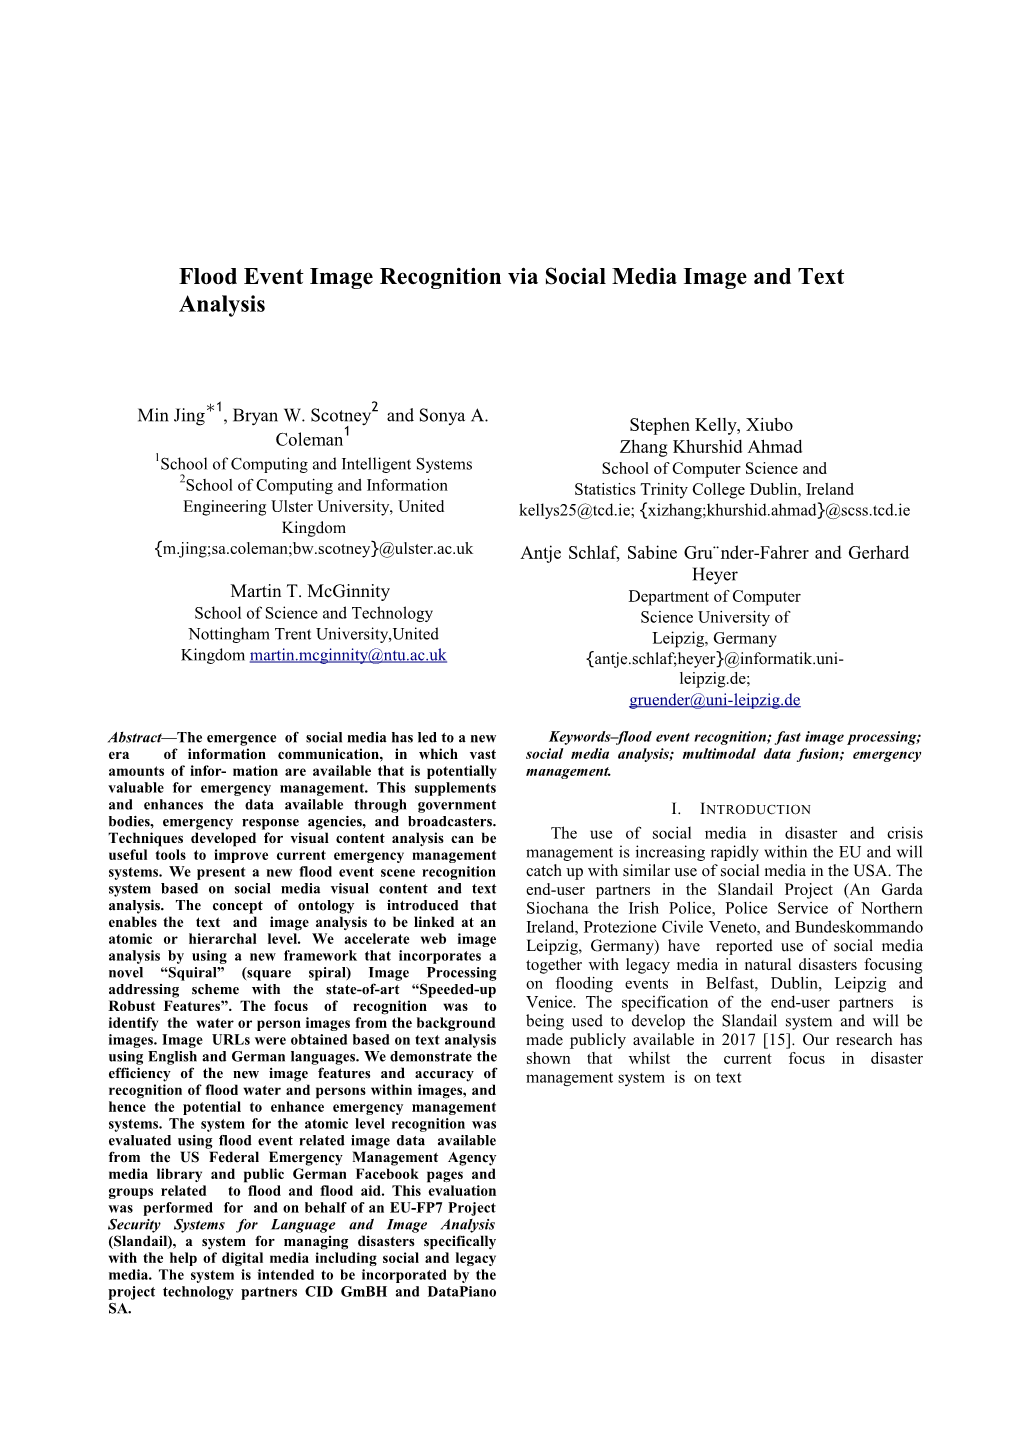 Flood Event Image Recognition Via Social Media Image and Text Analysis